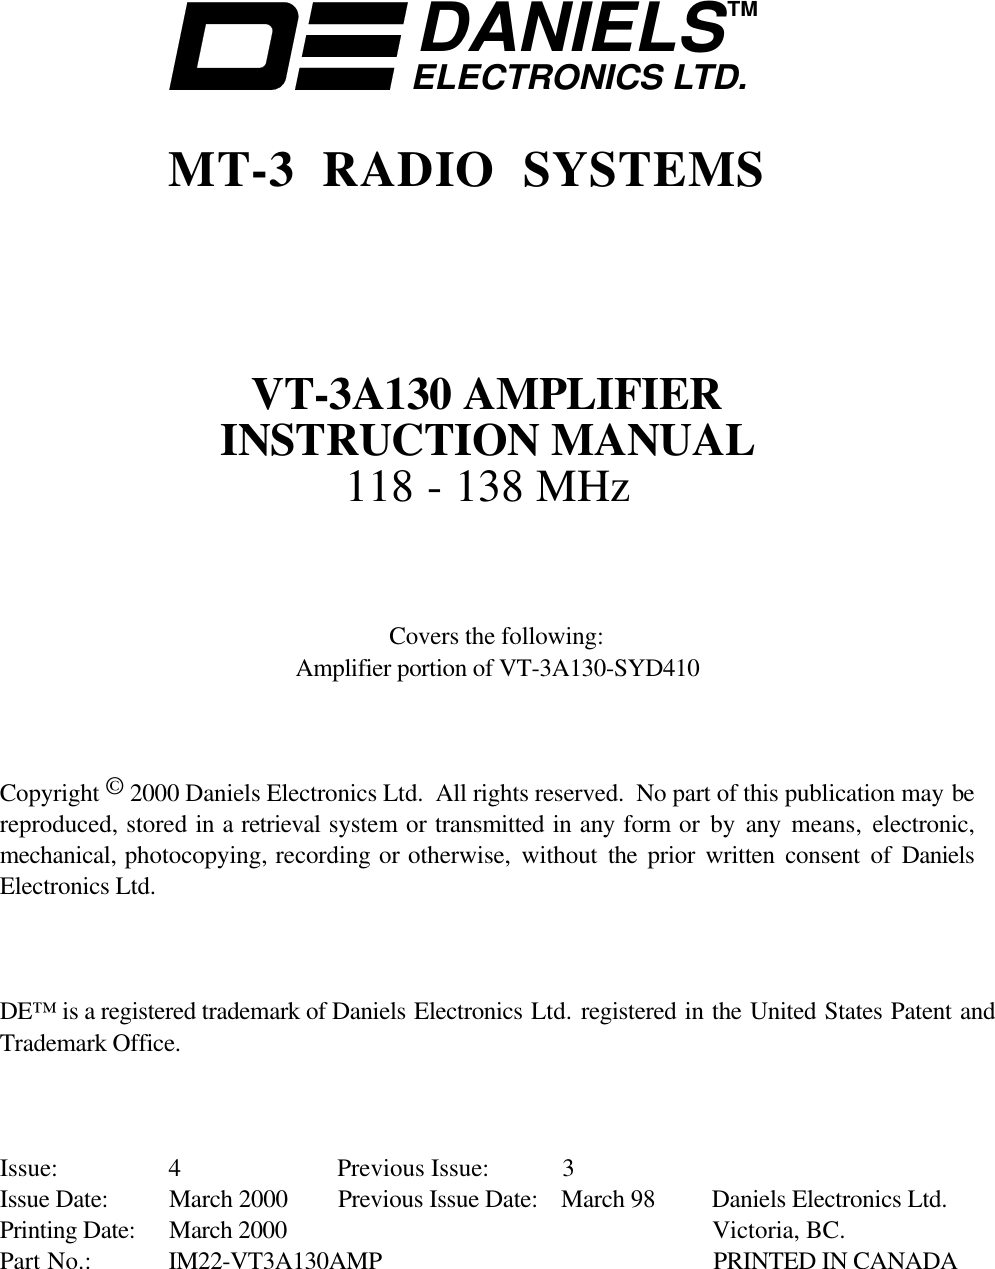 DANIELSELECTRONICS LTD.TMMT-3 RADIO SYSTEMSVT-3A130 AMPLIFIERINSTRUCTION MANUAL118 - 138 MHzCovers the following:Amplifier portion of VT-3A130-SYD410Copyright © 2000 Daniels Electronics Ltd.  All rights reserved.  No part of this publication may bereproduced, stored in a retrieval system or transmitted in any form or by any means,  electronic,mechanical, photocopying, recording or otherwise, without the  prior written consent of DanielsElectronics Ltd.DE™ is a registered trademark of Daniels Electronics Ltd. registered in the United States Patent andTrademark Office.Issue: 4 Previous Issue: 3Issue Date: March 2000 Previous Issue Date: March 98 Daniels Electronics Ltd.Printing Date: March 2000 Victoria, BC.Part No.: IM22-VT3A130AMP PRINTED IN CANADA